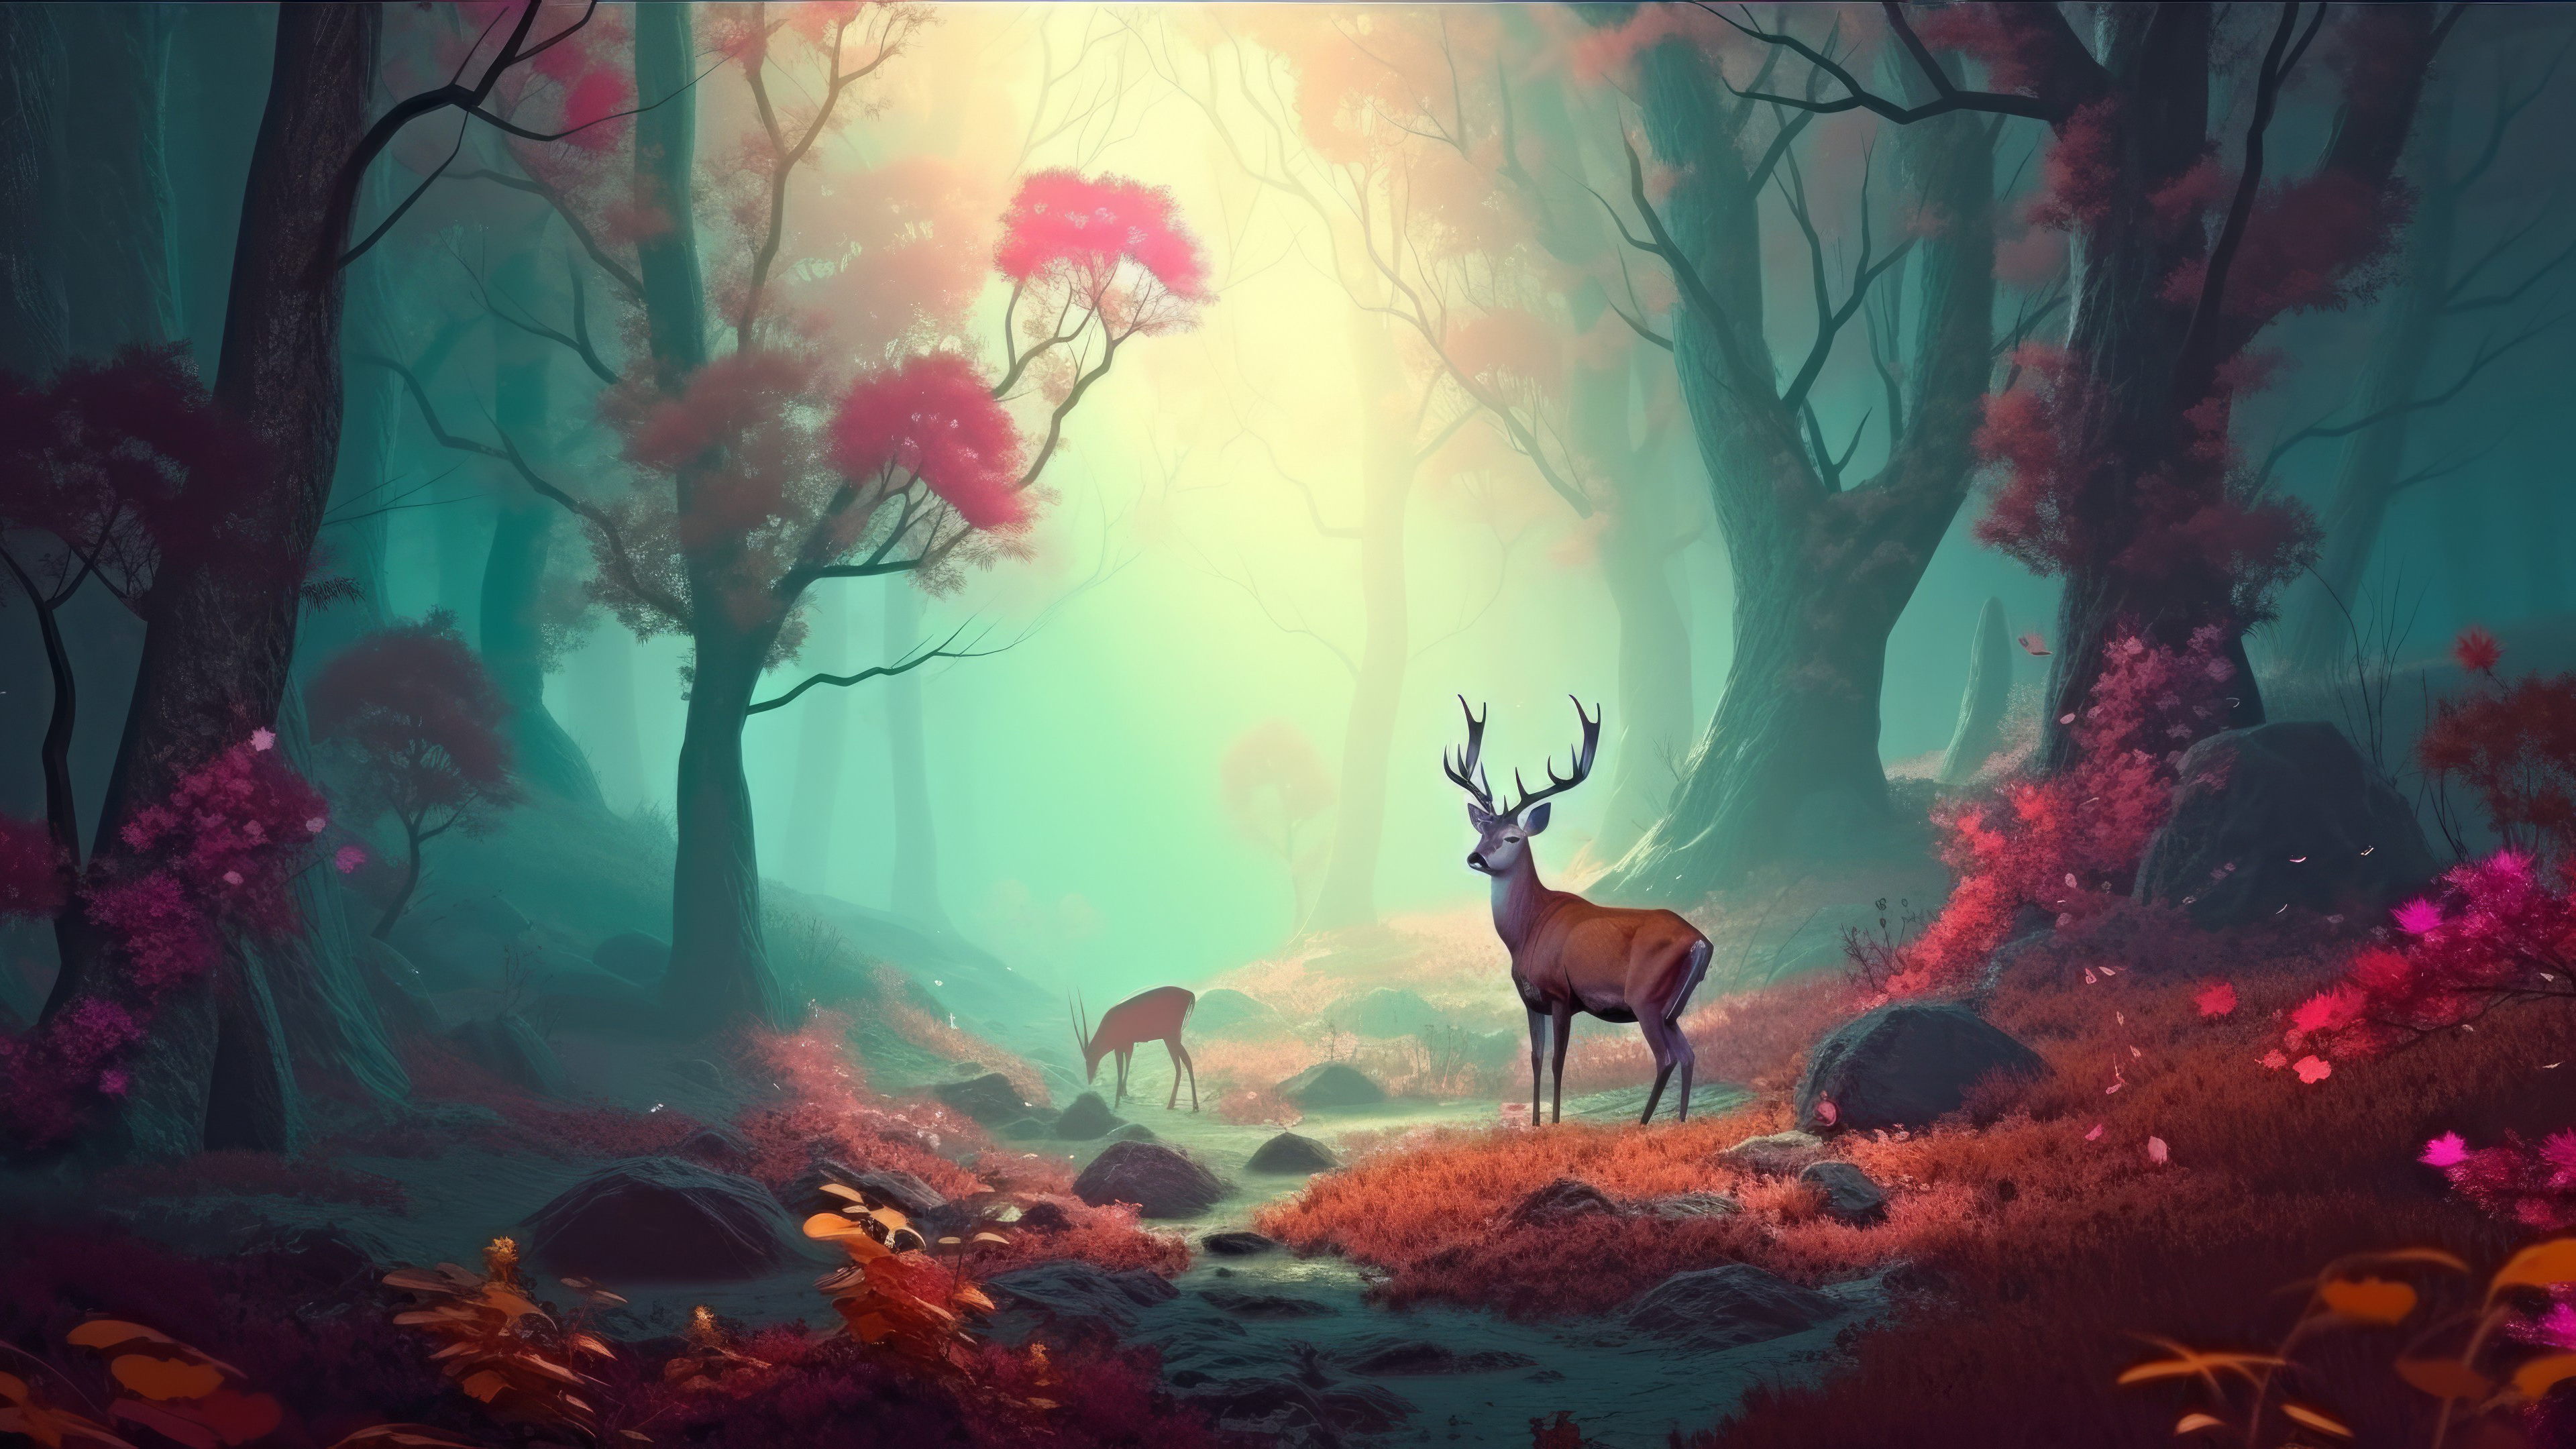 A fantastic misty forest with reindeer